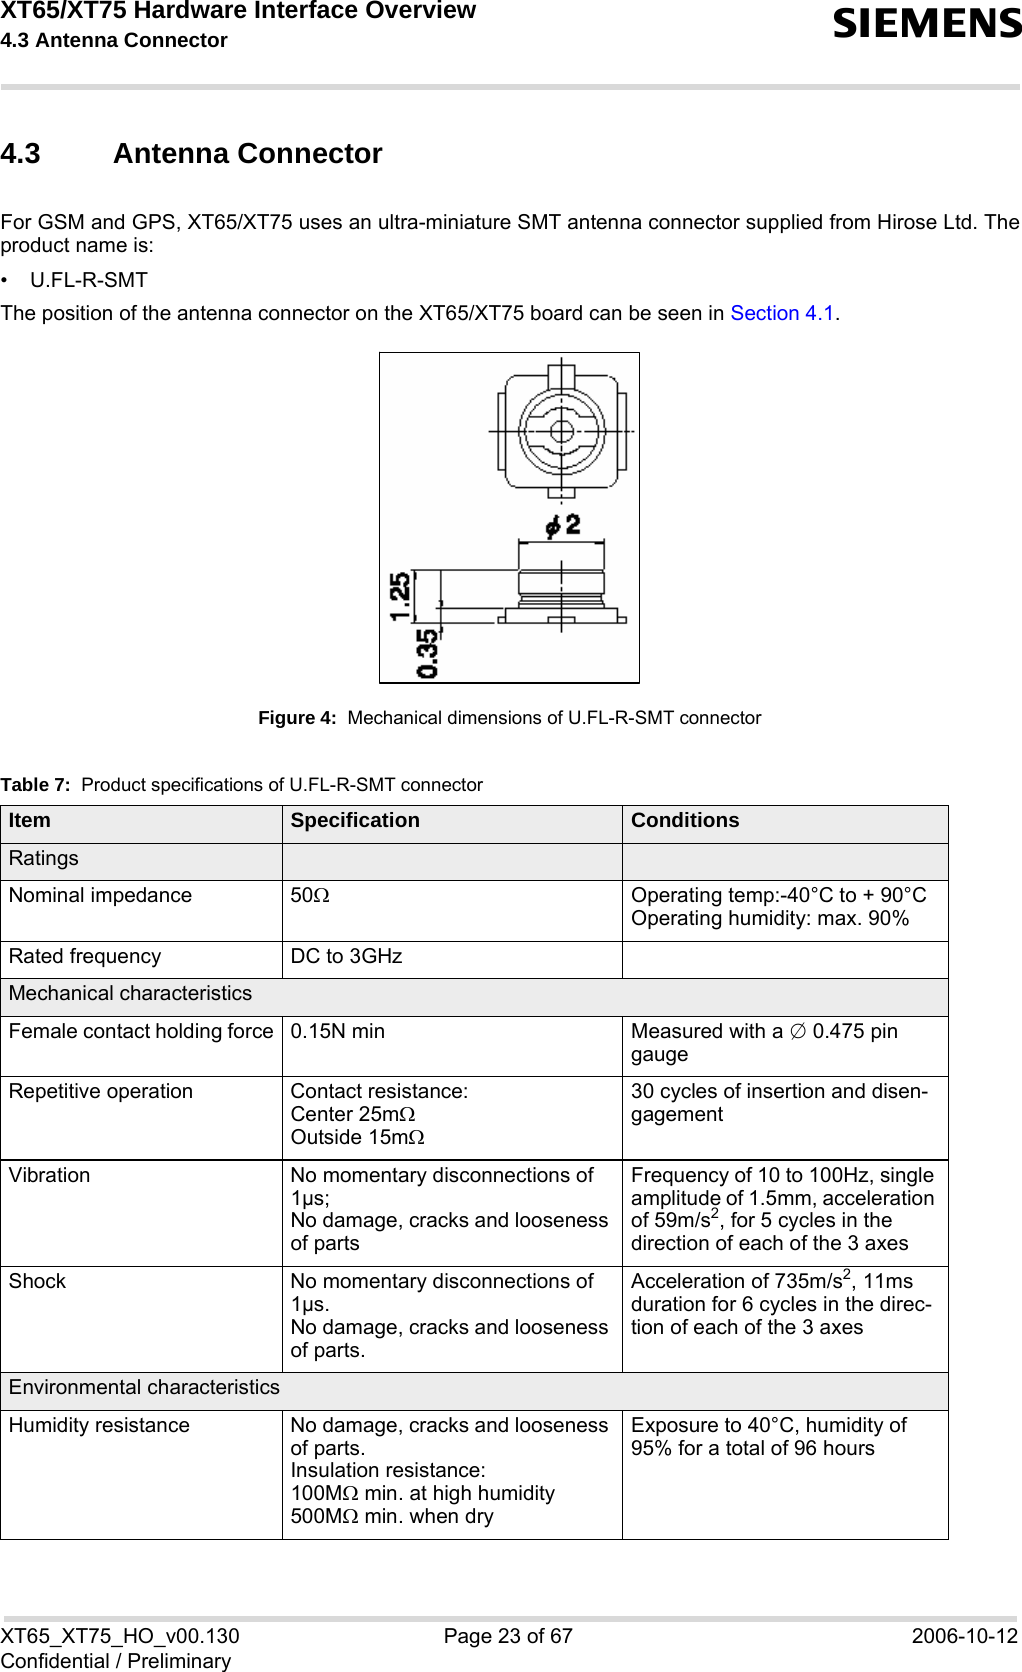 XT65/XT75 Hardware Interface Overview 4.3 Antenna Connector sXT65_XT75_HO_v00.130 Page 23 of 67 2006-10-12Confidential / Preliminary4.3 Antenna Connector For GSM and GPS, XT65/XT75 uses an ultra-miniature SMT antenna connector supplied from Hirose Ltd. Theproduct name is:•U.FL-R-SMTThe position of the antenna connector on the XT65/XT75 board can be seen in Section 4.1.Figure 4:  Mechanical dimensions of U.FL-R-SMT connector Table 7:  Product specifications of U.FL-R-SMT connectorItem Specification ConditionsRatingsNominal impedance 50ΩOperating temp:-40°C to + 90°COperating humidity: max. 90%Rated frequency DC to 3GHzMechanical characteristicsFemale contact holding force 0.15N min Measured with a ; 0.475 pin gaugeRepetitive operation Contact resistance:Center 25mΩ Outside 15mΩ30 cycles of insertion and disen-gagementVibration No momentary disconnections of 1µs;No damage, cracks and looseness of partsFrequency of 10 to 100Hz, single amplitude of 1.5mm, acceleration of 59m/s2, for 5 cycles in the direction of each of the 3 axesShock No momentary disconnections of 1µs.No damage, cracks and looseness of parts.Acceleration of 735m/s2, 11ms duration for 6 cycles in the direc-tion of each of the 3 axesEnvironmental characteristicsHumidity resistance No damage, cracks and looseness of parts.Insulation resistance: 100MΩ min. at high humidity500MΩ min. when dryExposure to 40°C, humidity of 95% for a total of 96 hours